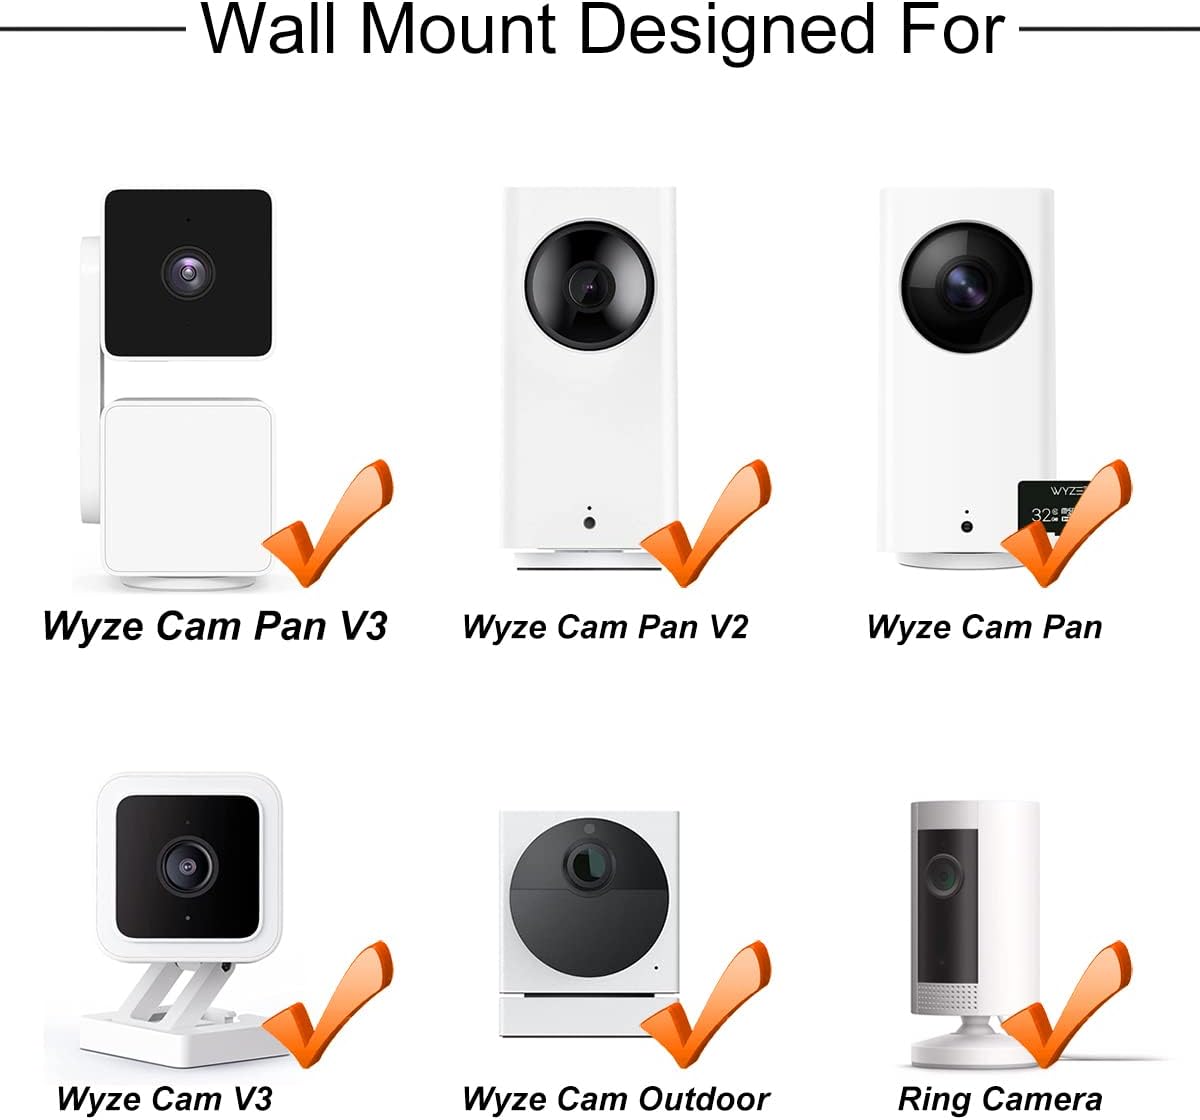 Remarks on Wall Mount for Wyze Cam Pan V3/Wyze Cam V3